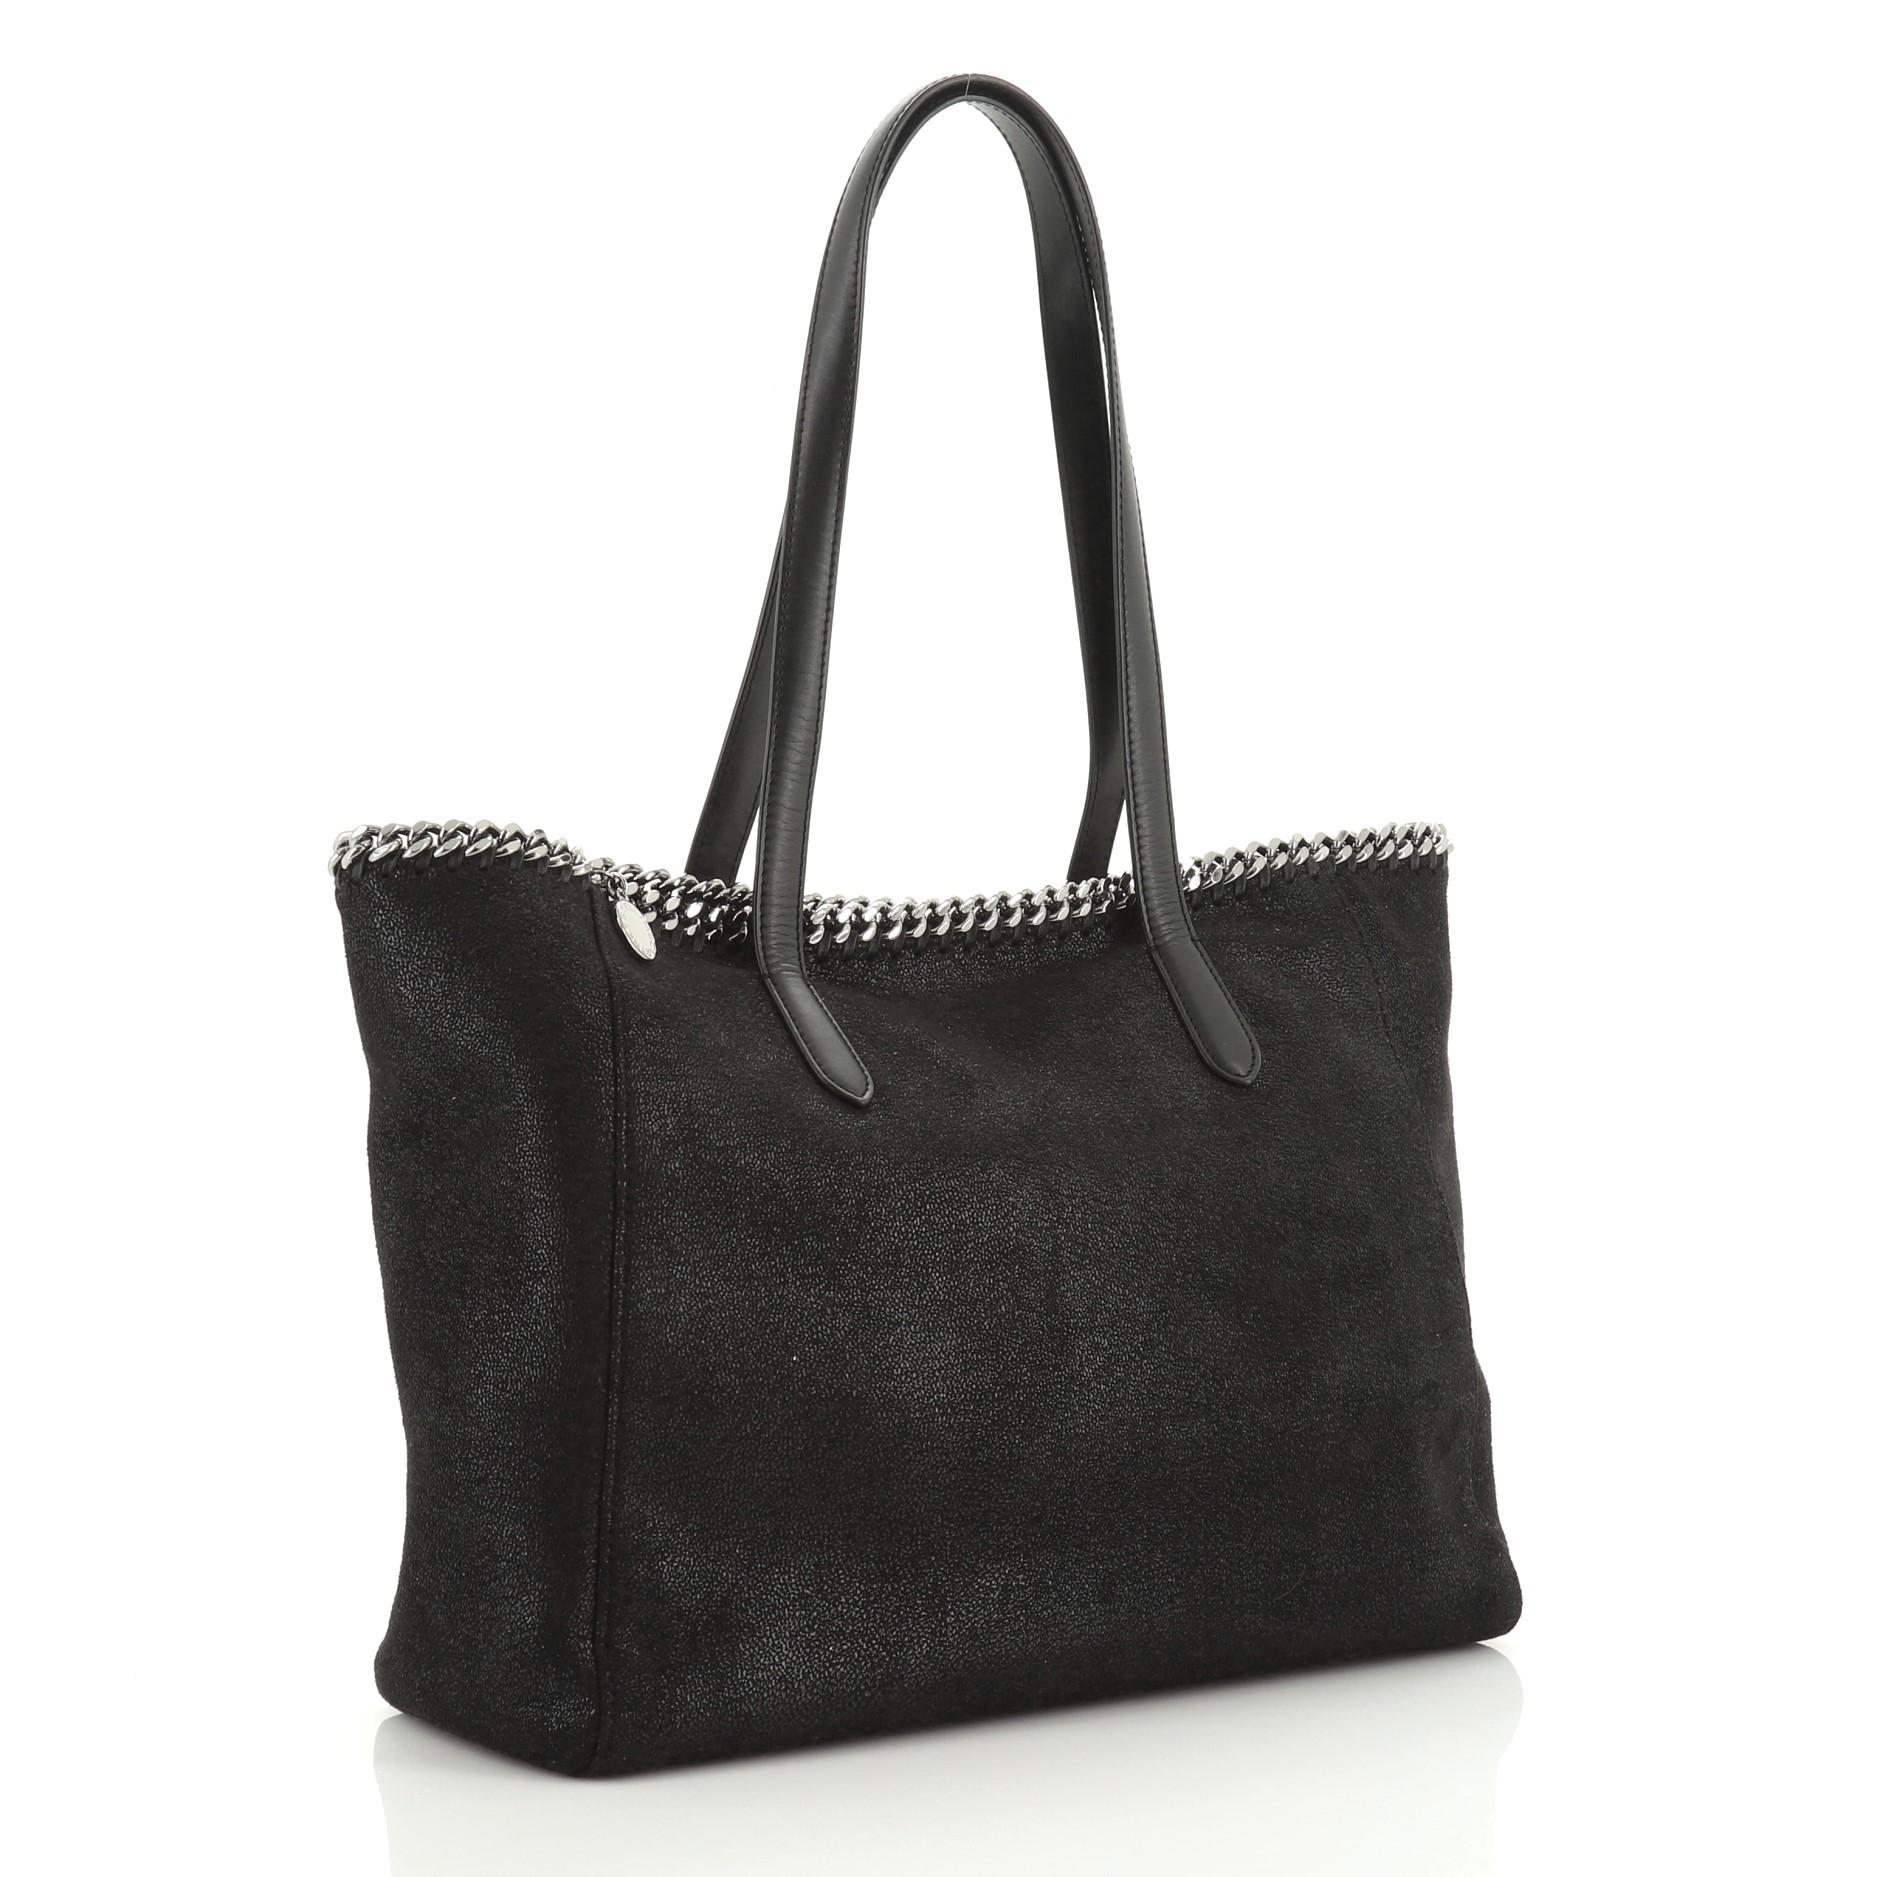 This Stella McCartney Falabella Shopper Tote Shaggy Deer East West, crafted in black fabric, features dual flat handles, chain trim and gunmetal-tone hardware. It opens to a pink fabric interior. 

Estimated Retail Price: $985
Condition: Excellent.